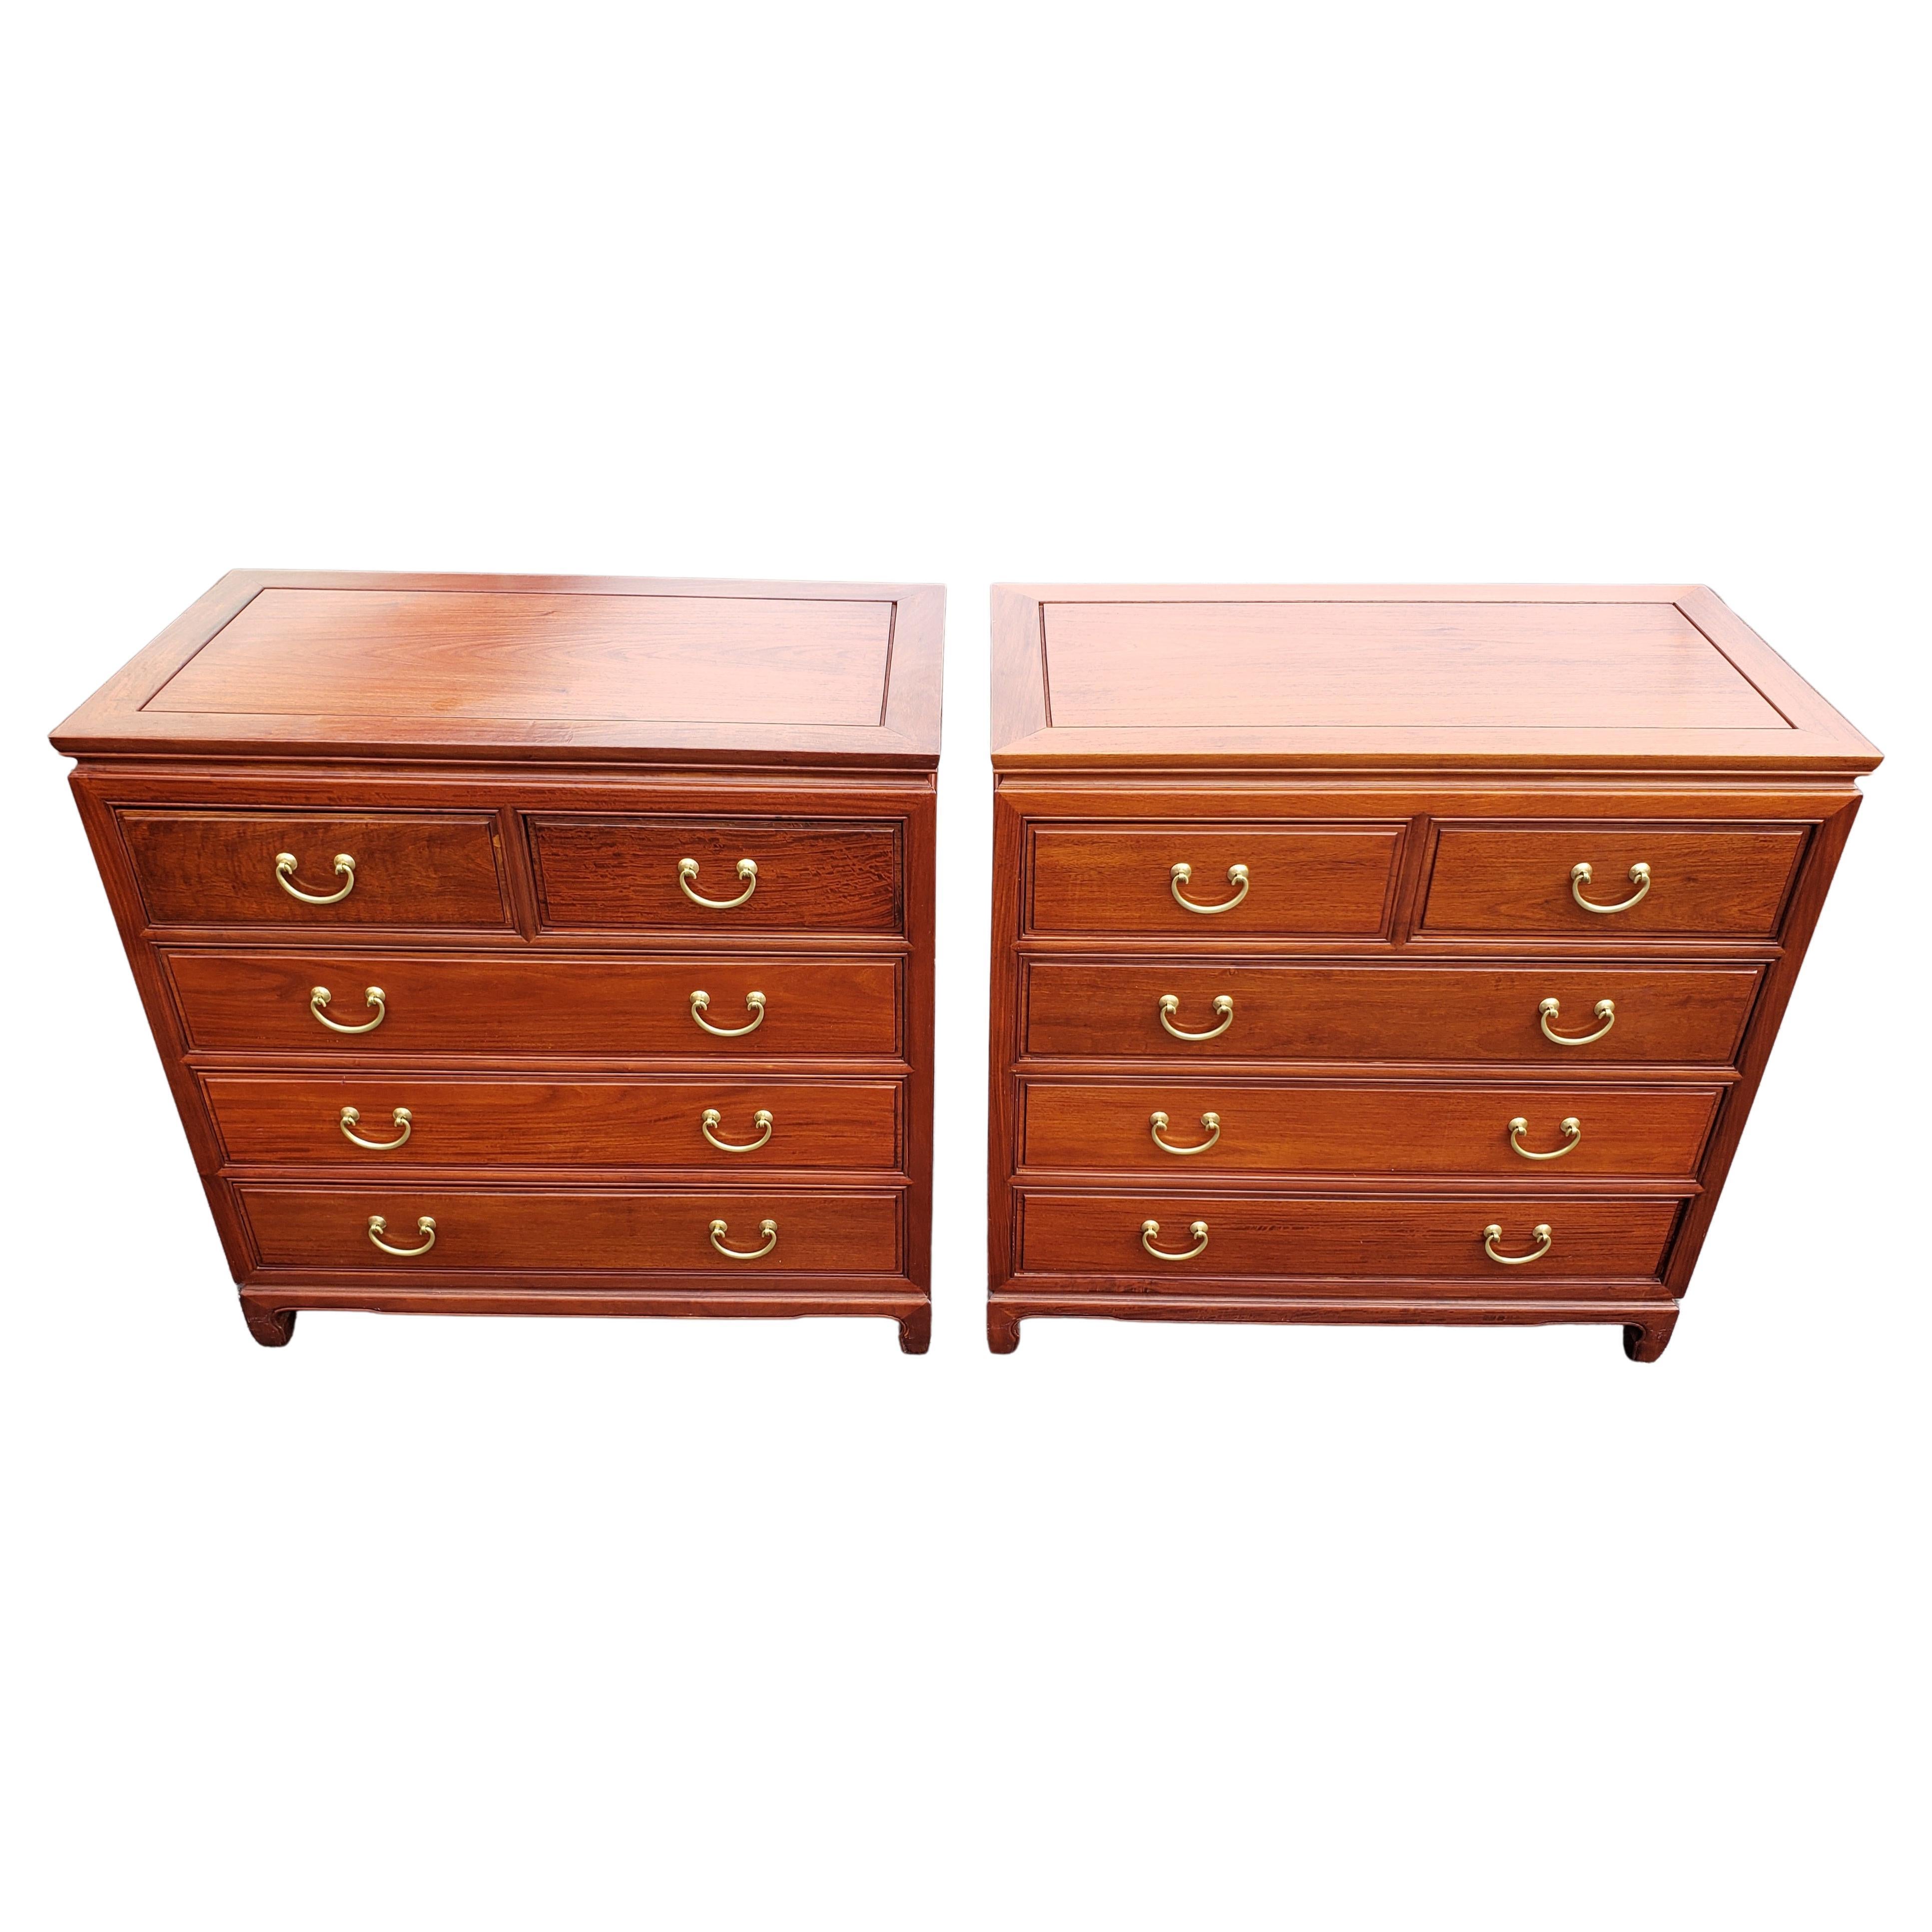 Perfectly handcrafted George Zee Asian American Chippendale Rosewood Chest of Drawers. 5 dovetailed rosewood drawers finished inside out sliding perfectly. Very good vintage condition with very few signs of previous use. Heavy Chinese Chippendale